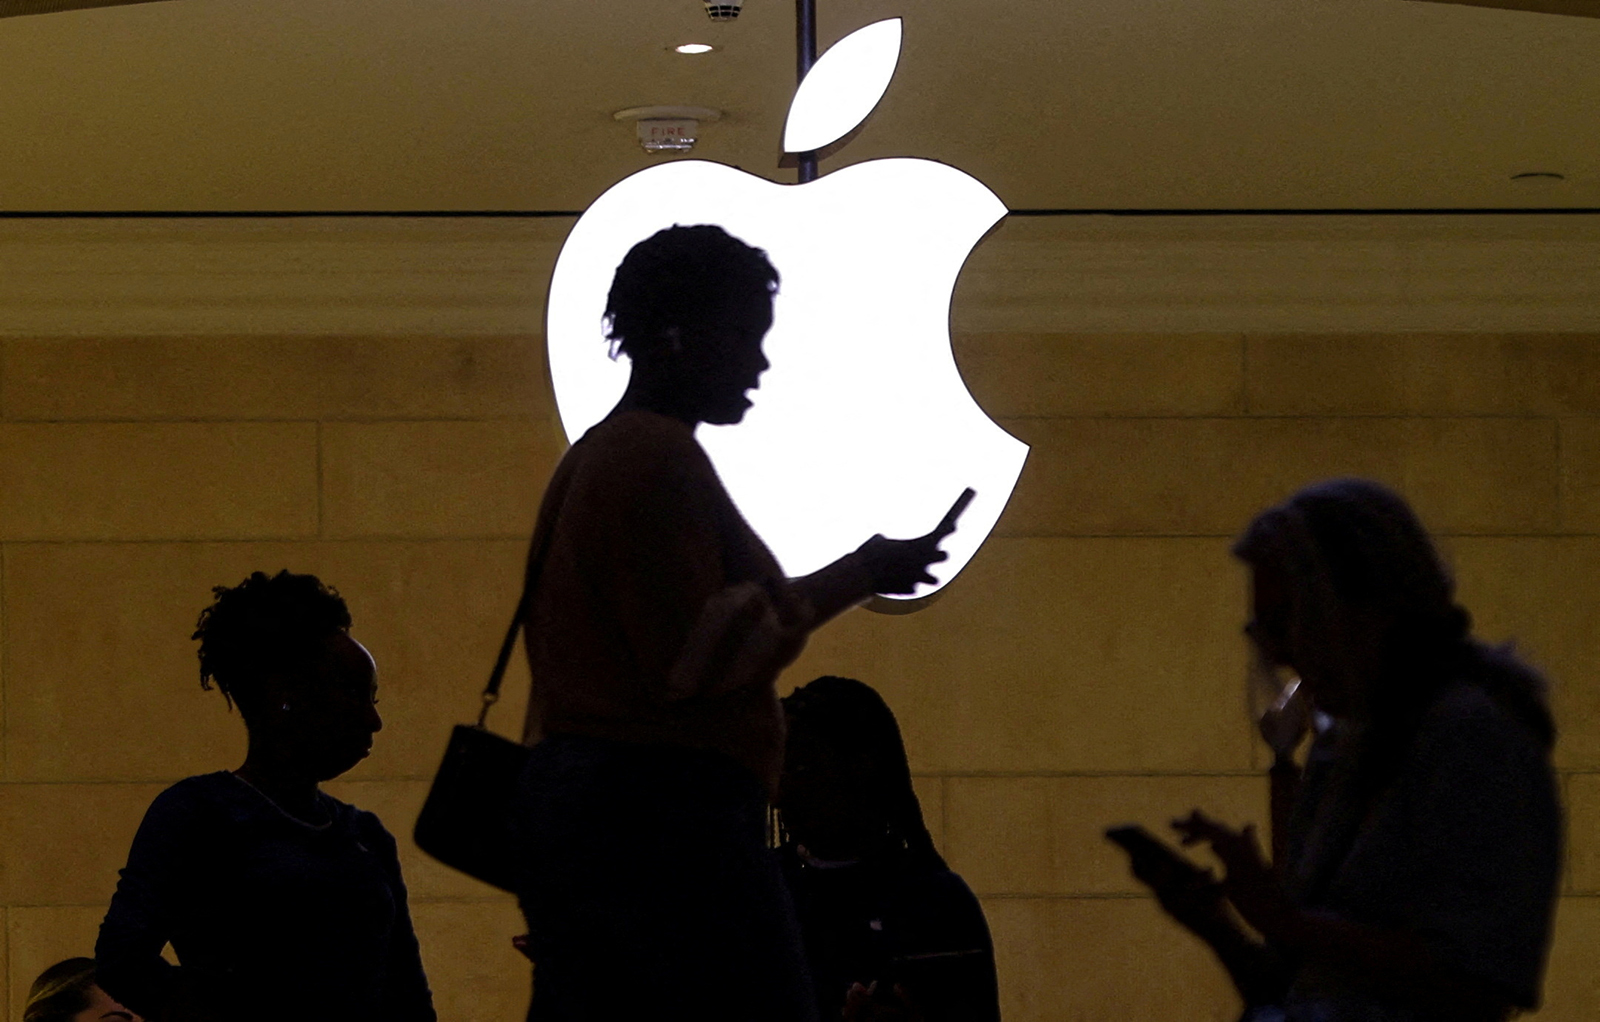 A woman uses an iPhone mobile device at the Apple store at Grand Central Terminal in New York City, on April 14.